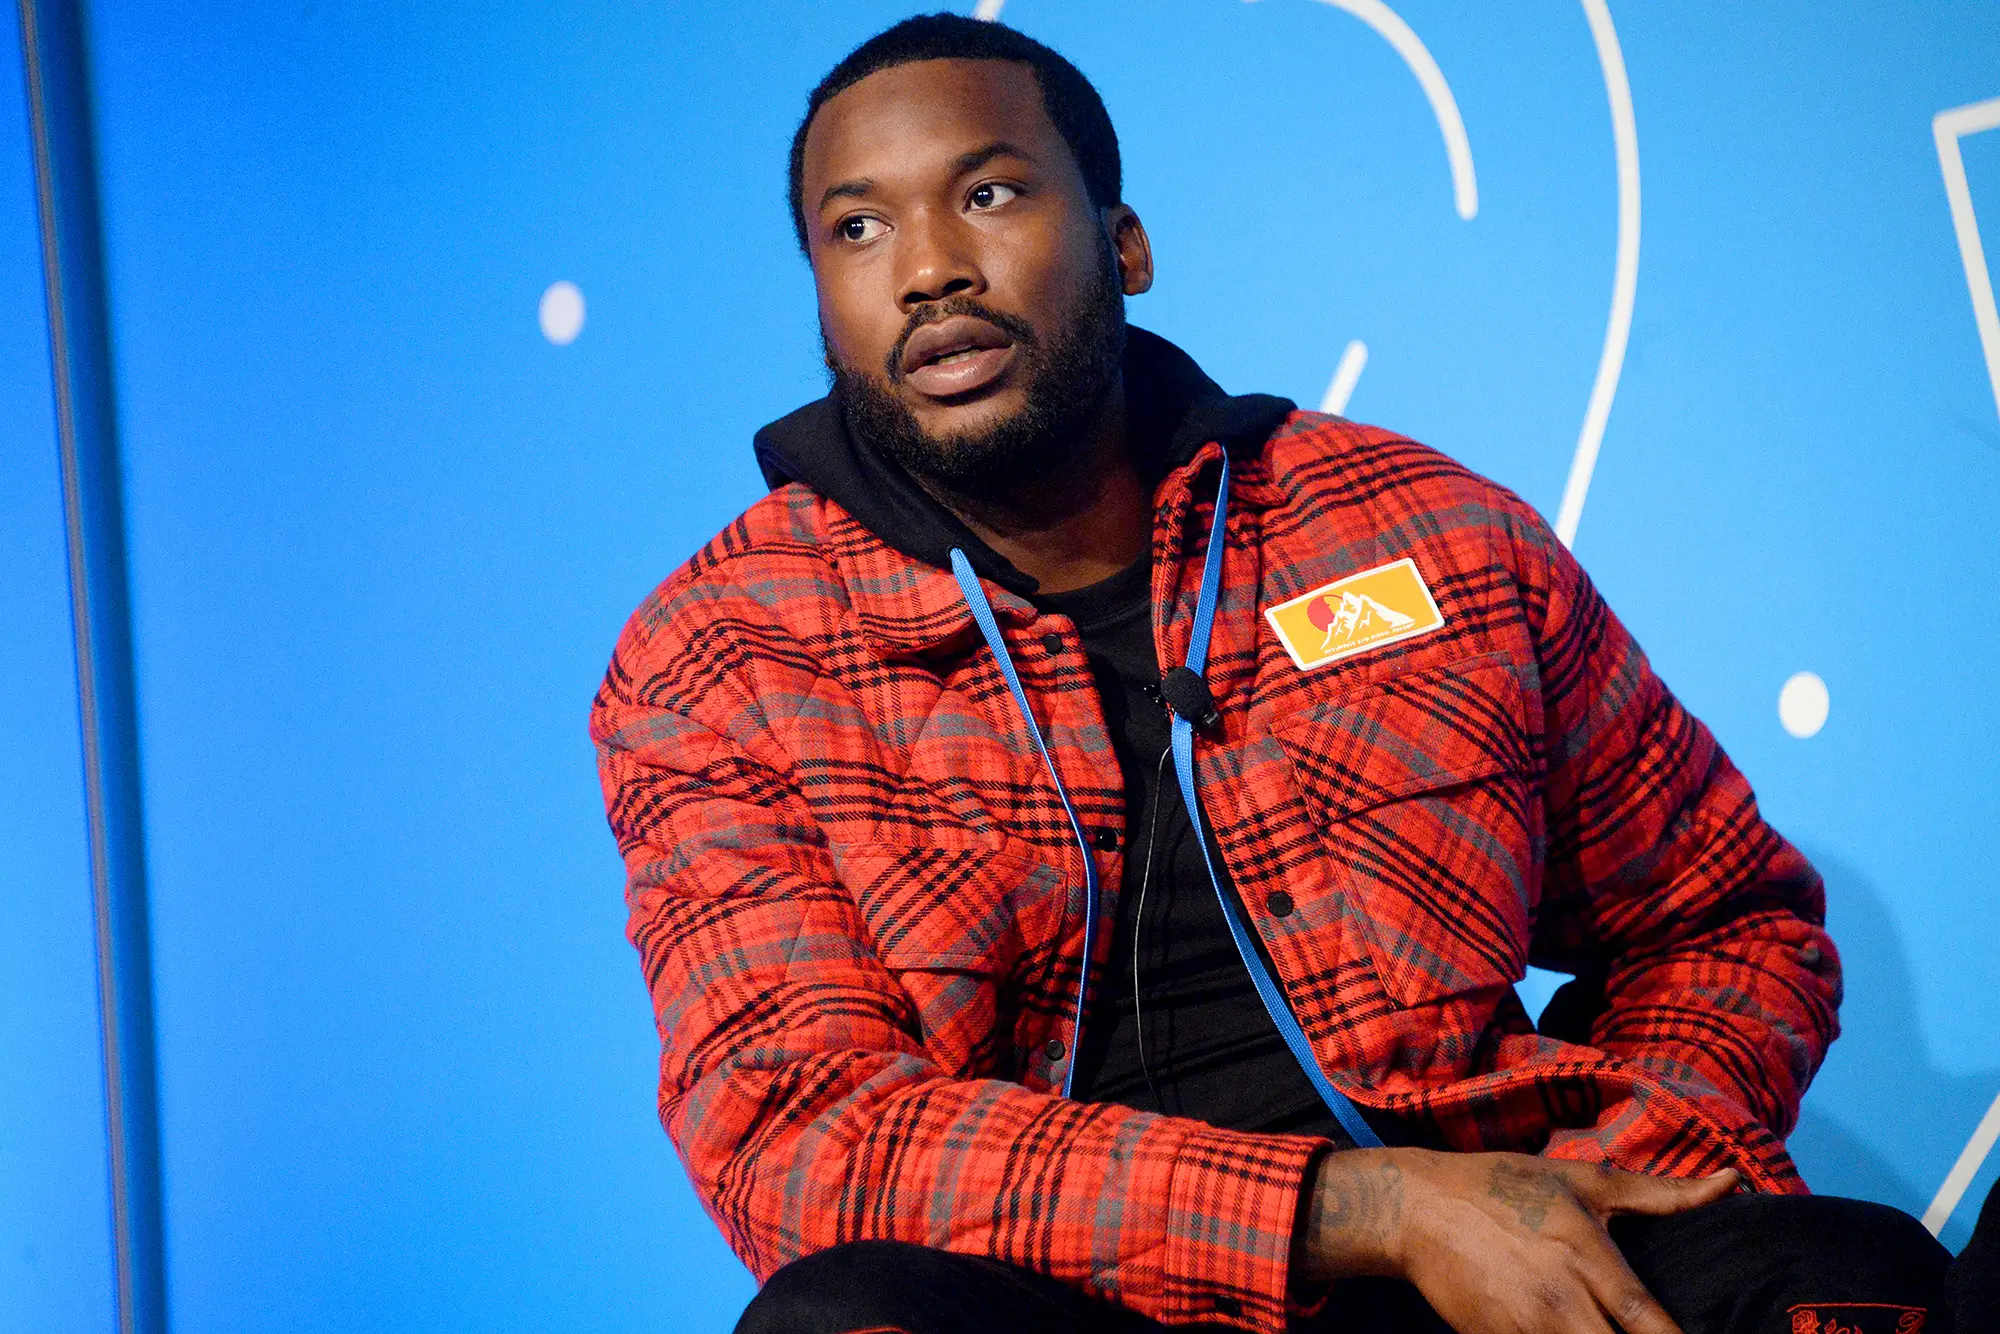 Meek Mill’s Net Worth, Musical Career, and Success Story